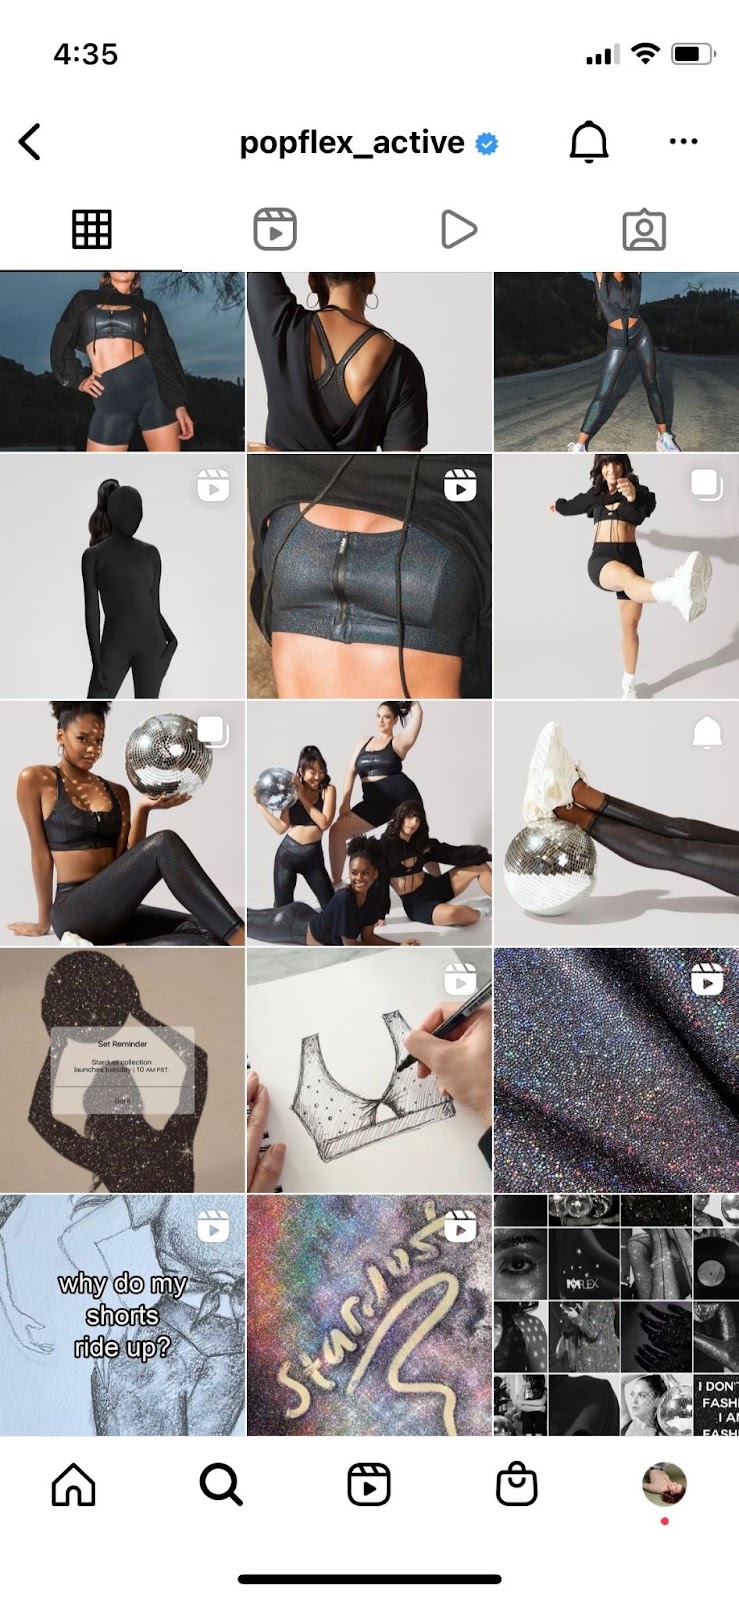 popflex_active - launching a new product on Instagram, new product launch examples